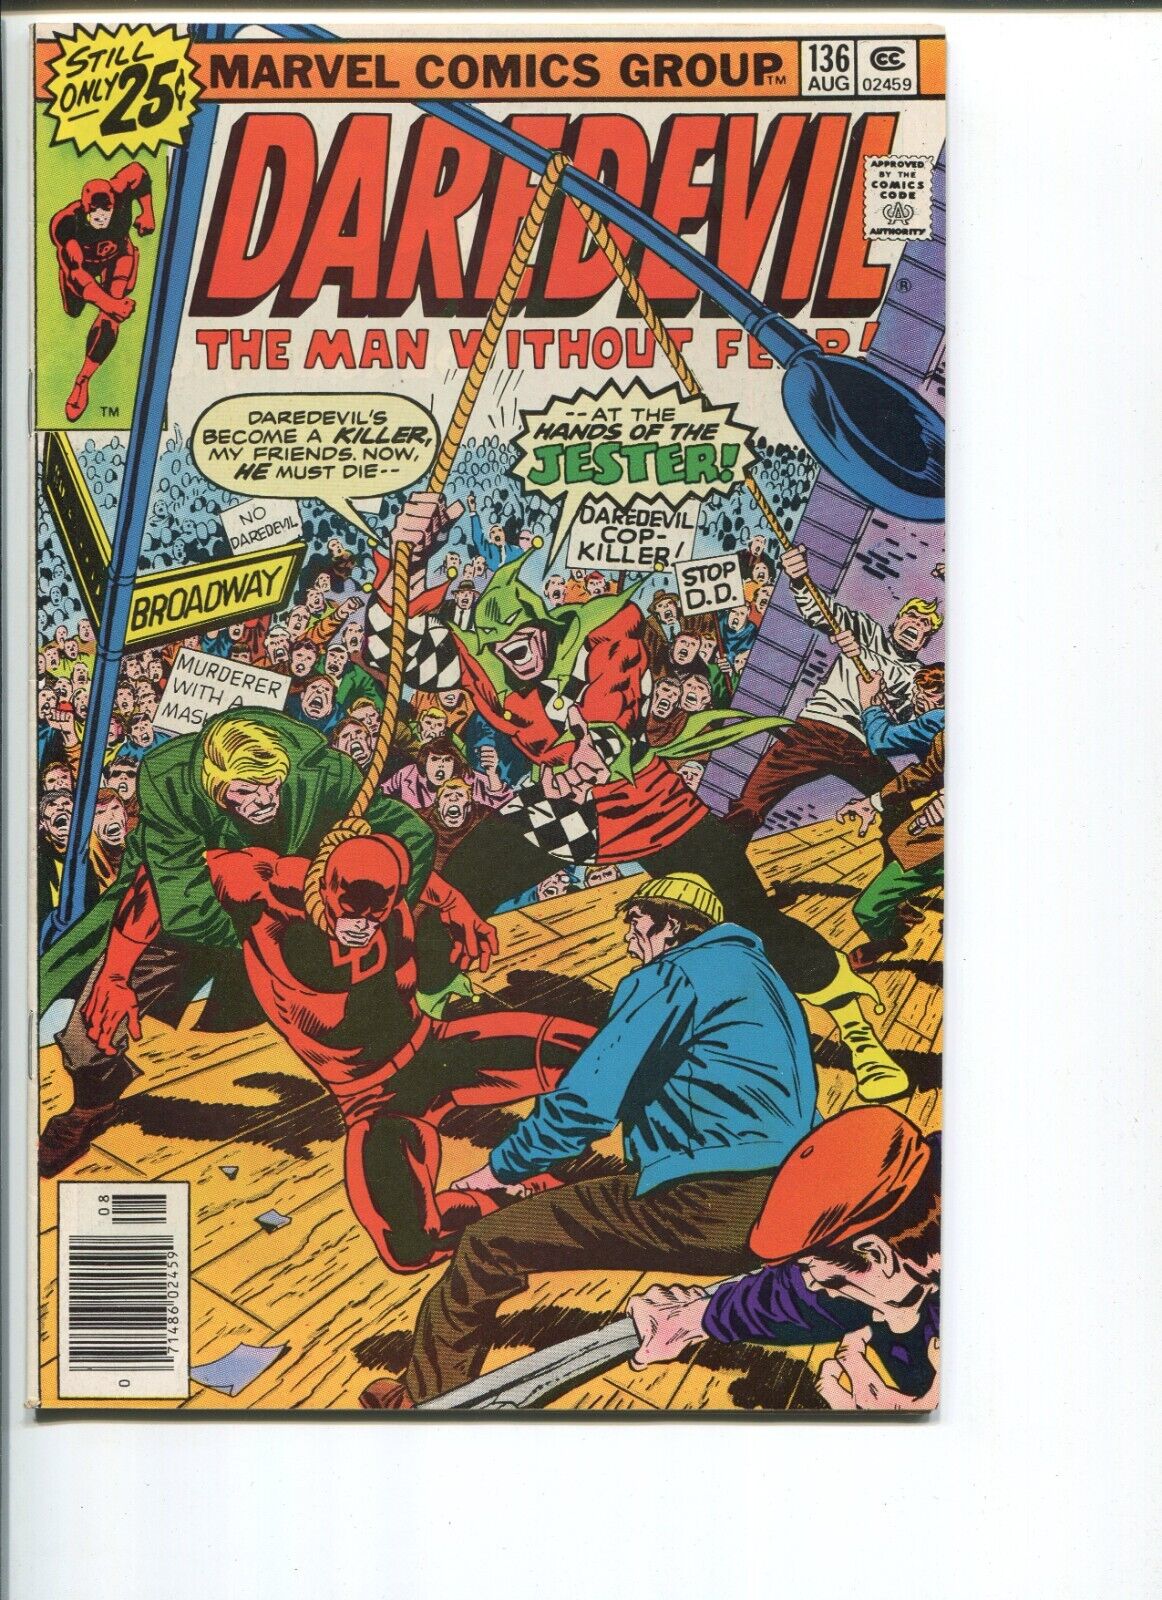 DAREDEVIL #136   9.2  NM-  ORIGINAL OWNER  NICE PAGES   STRICTLY GRADED